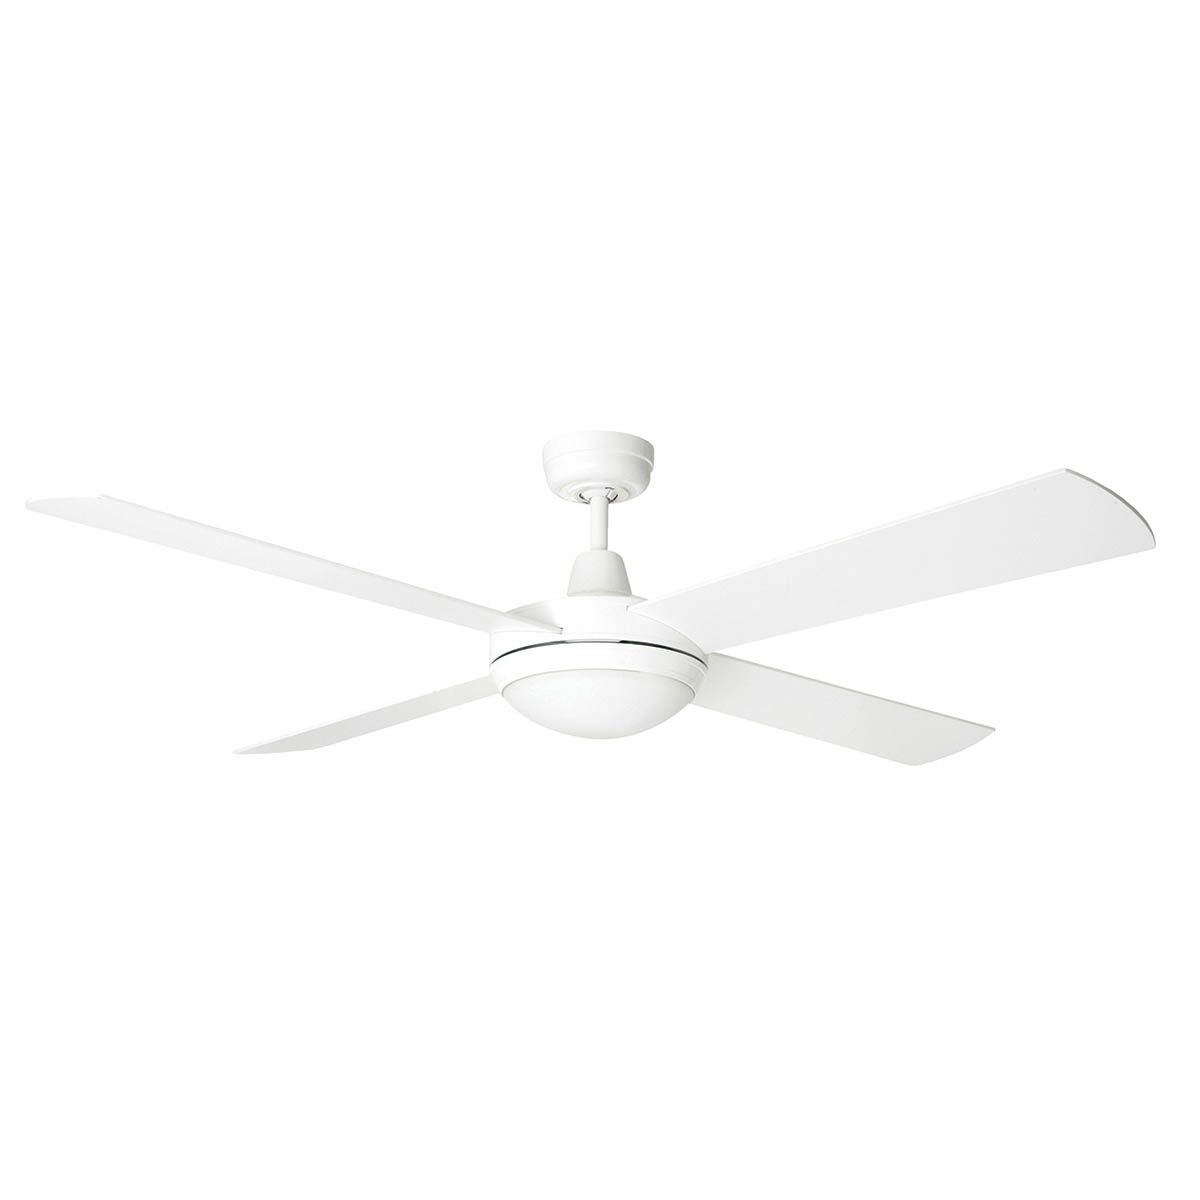 Brilliant 1320mm (52") STORM52 4 Blade Ceiling Sweep Fan With Plywood Blades White